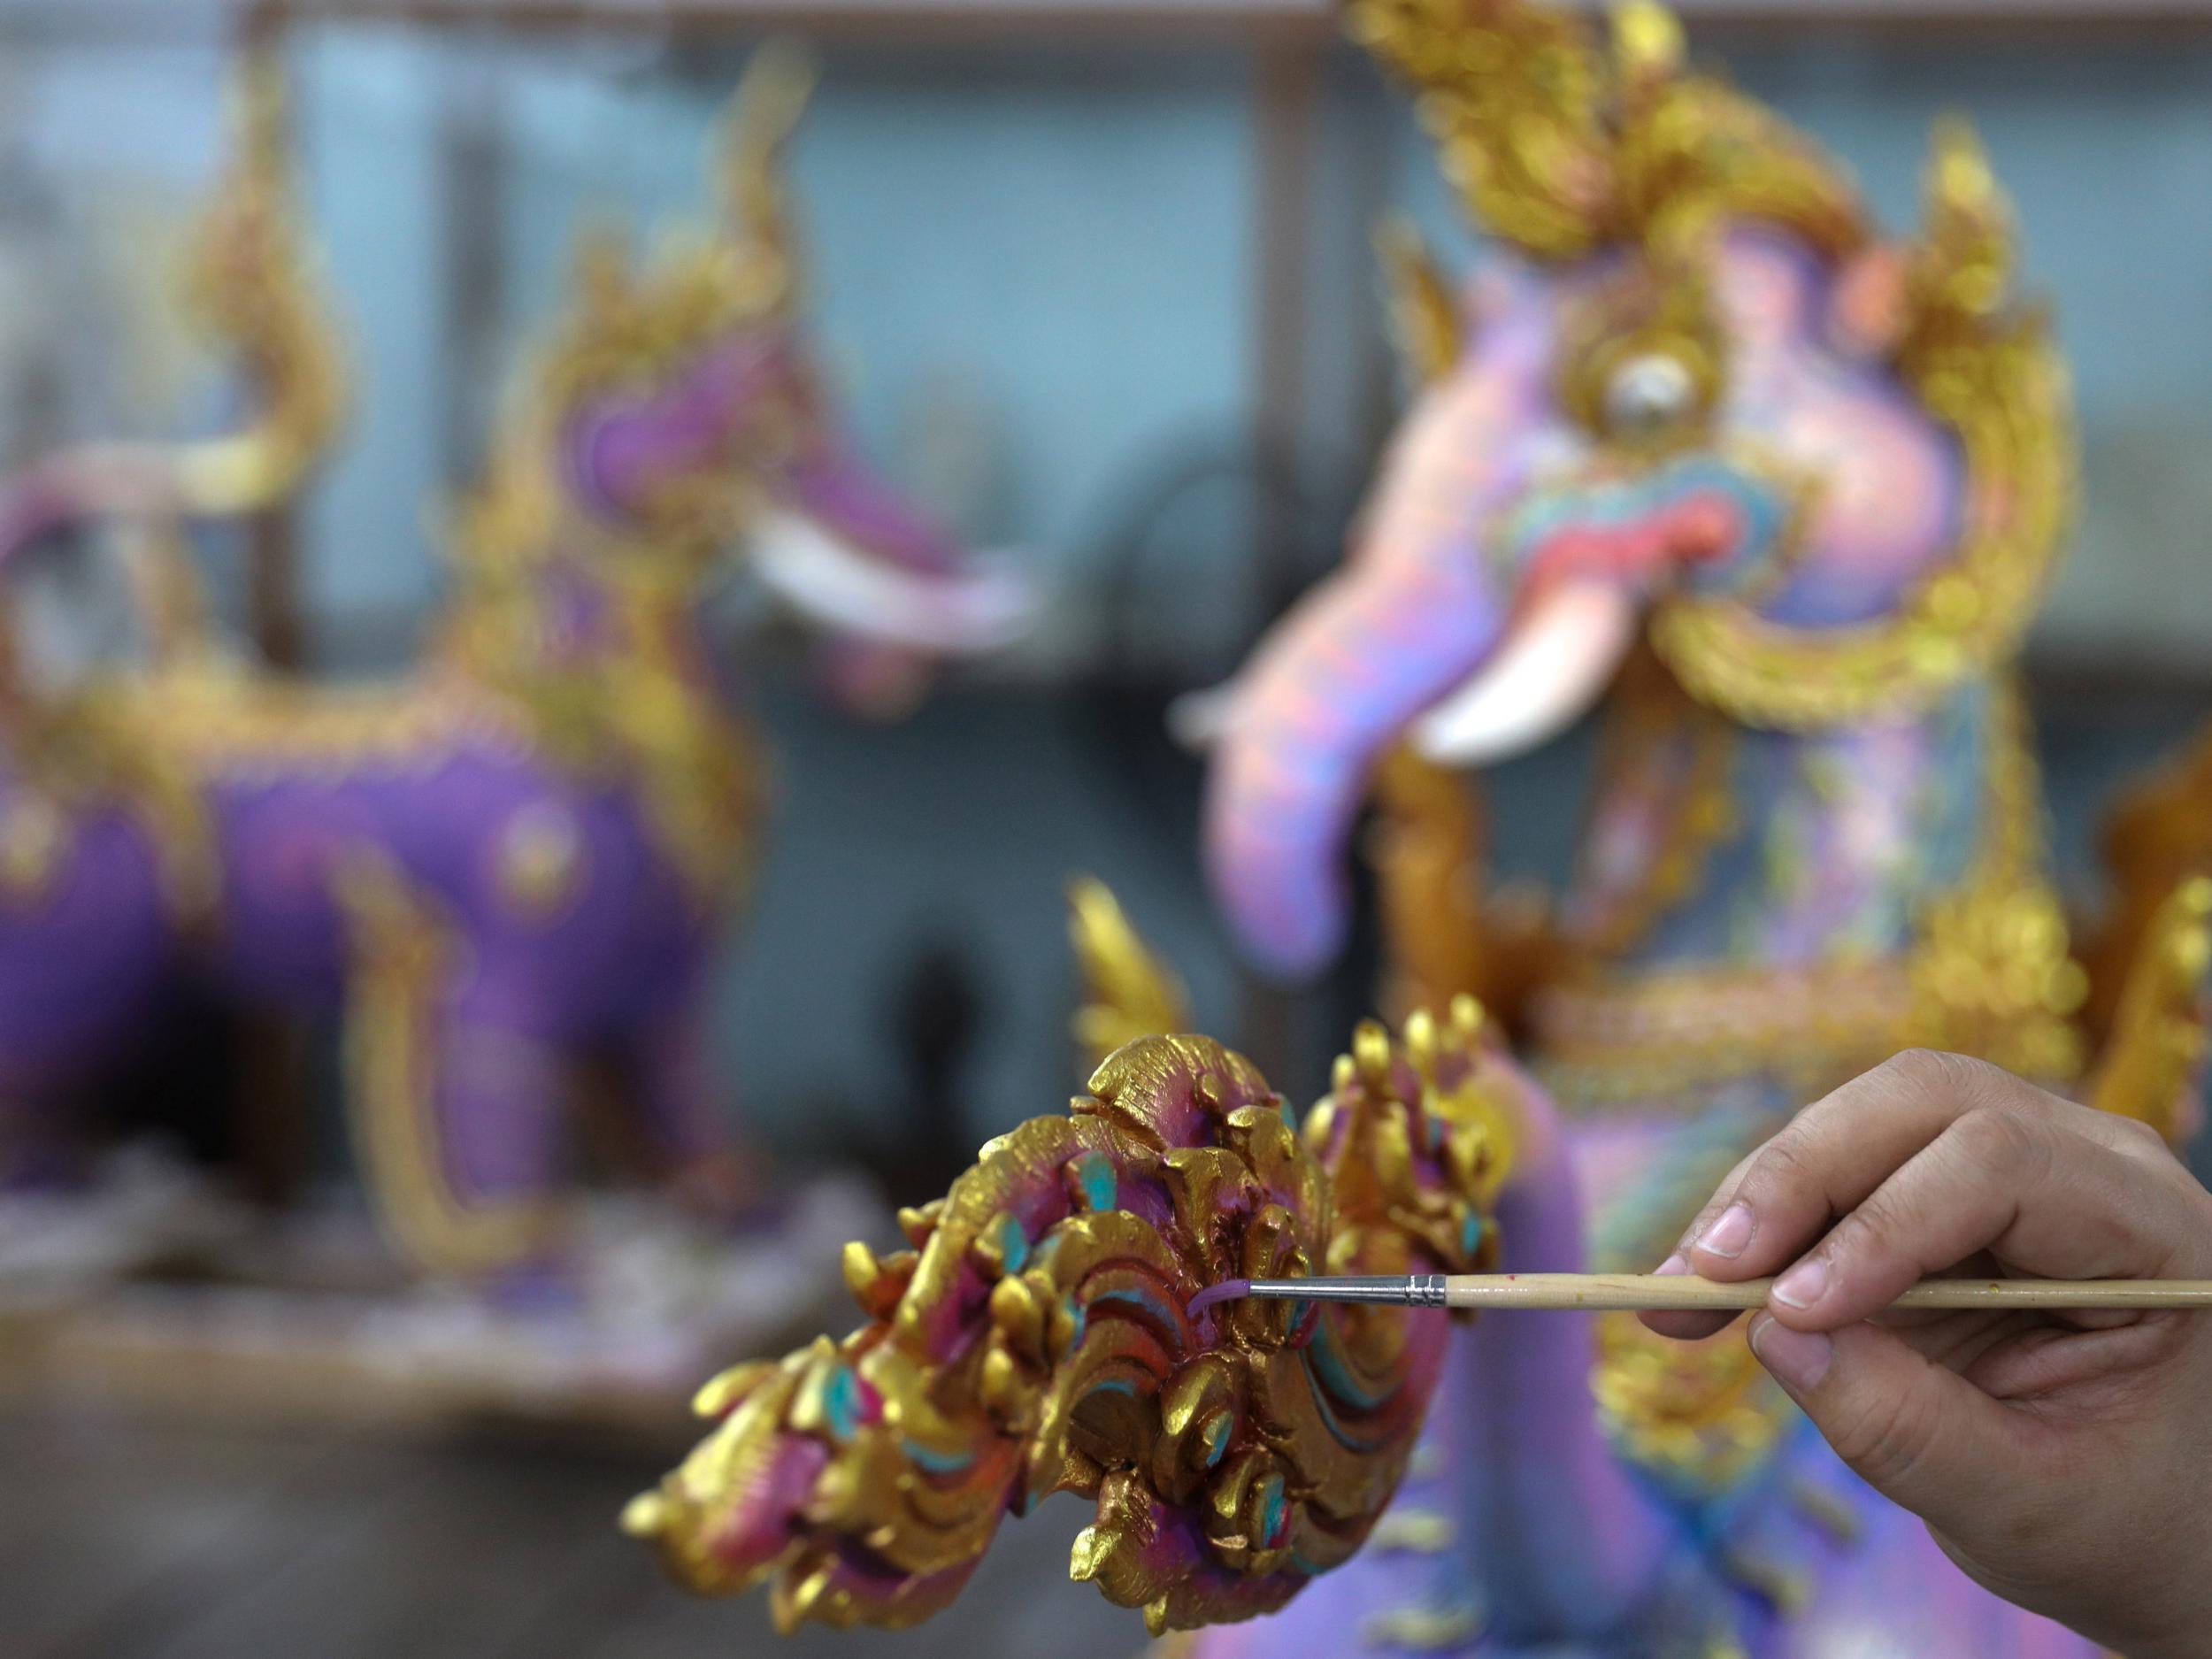 An artist works on a deity sculpture which will decorate the funeral pyre of the late King Bhumibol Adulyadej, near the Grand Palace in Bangkok